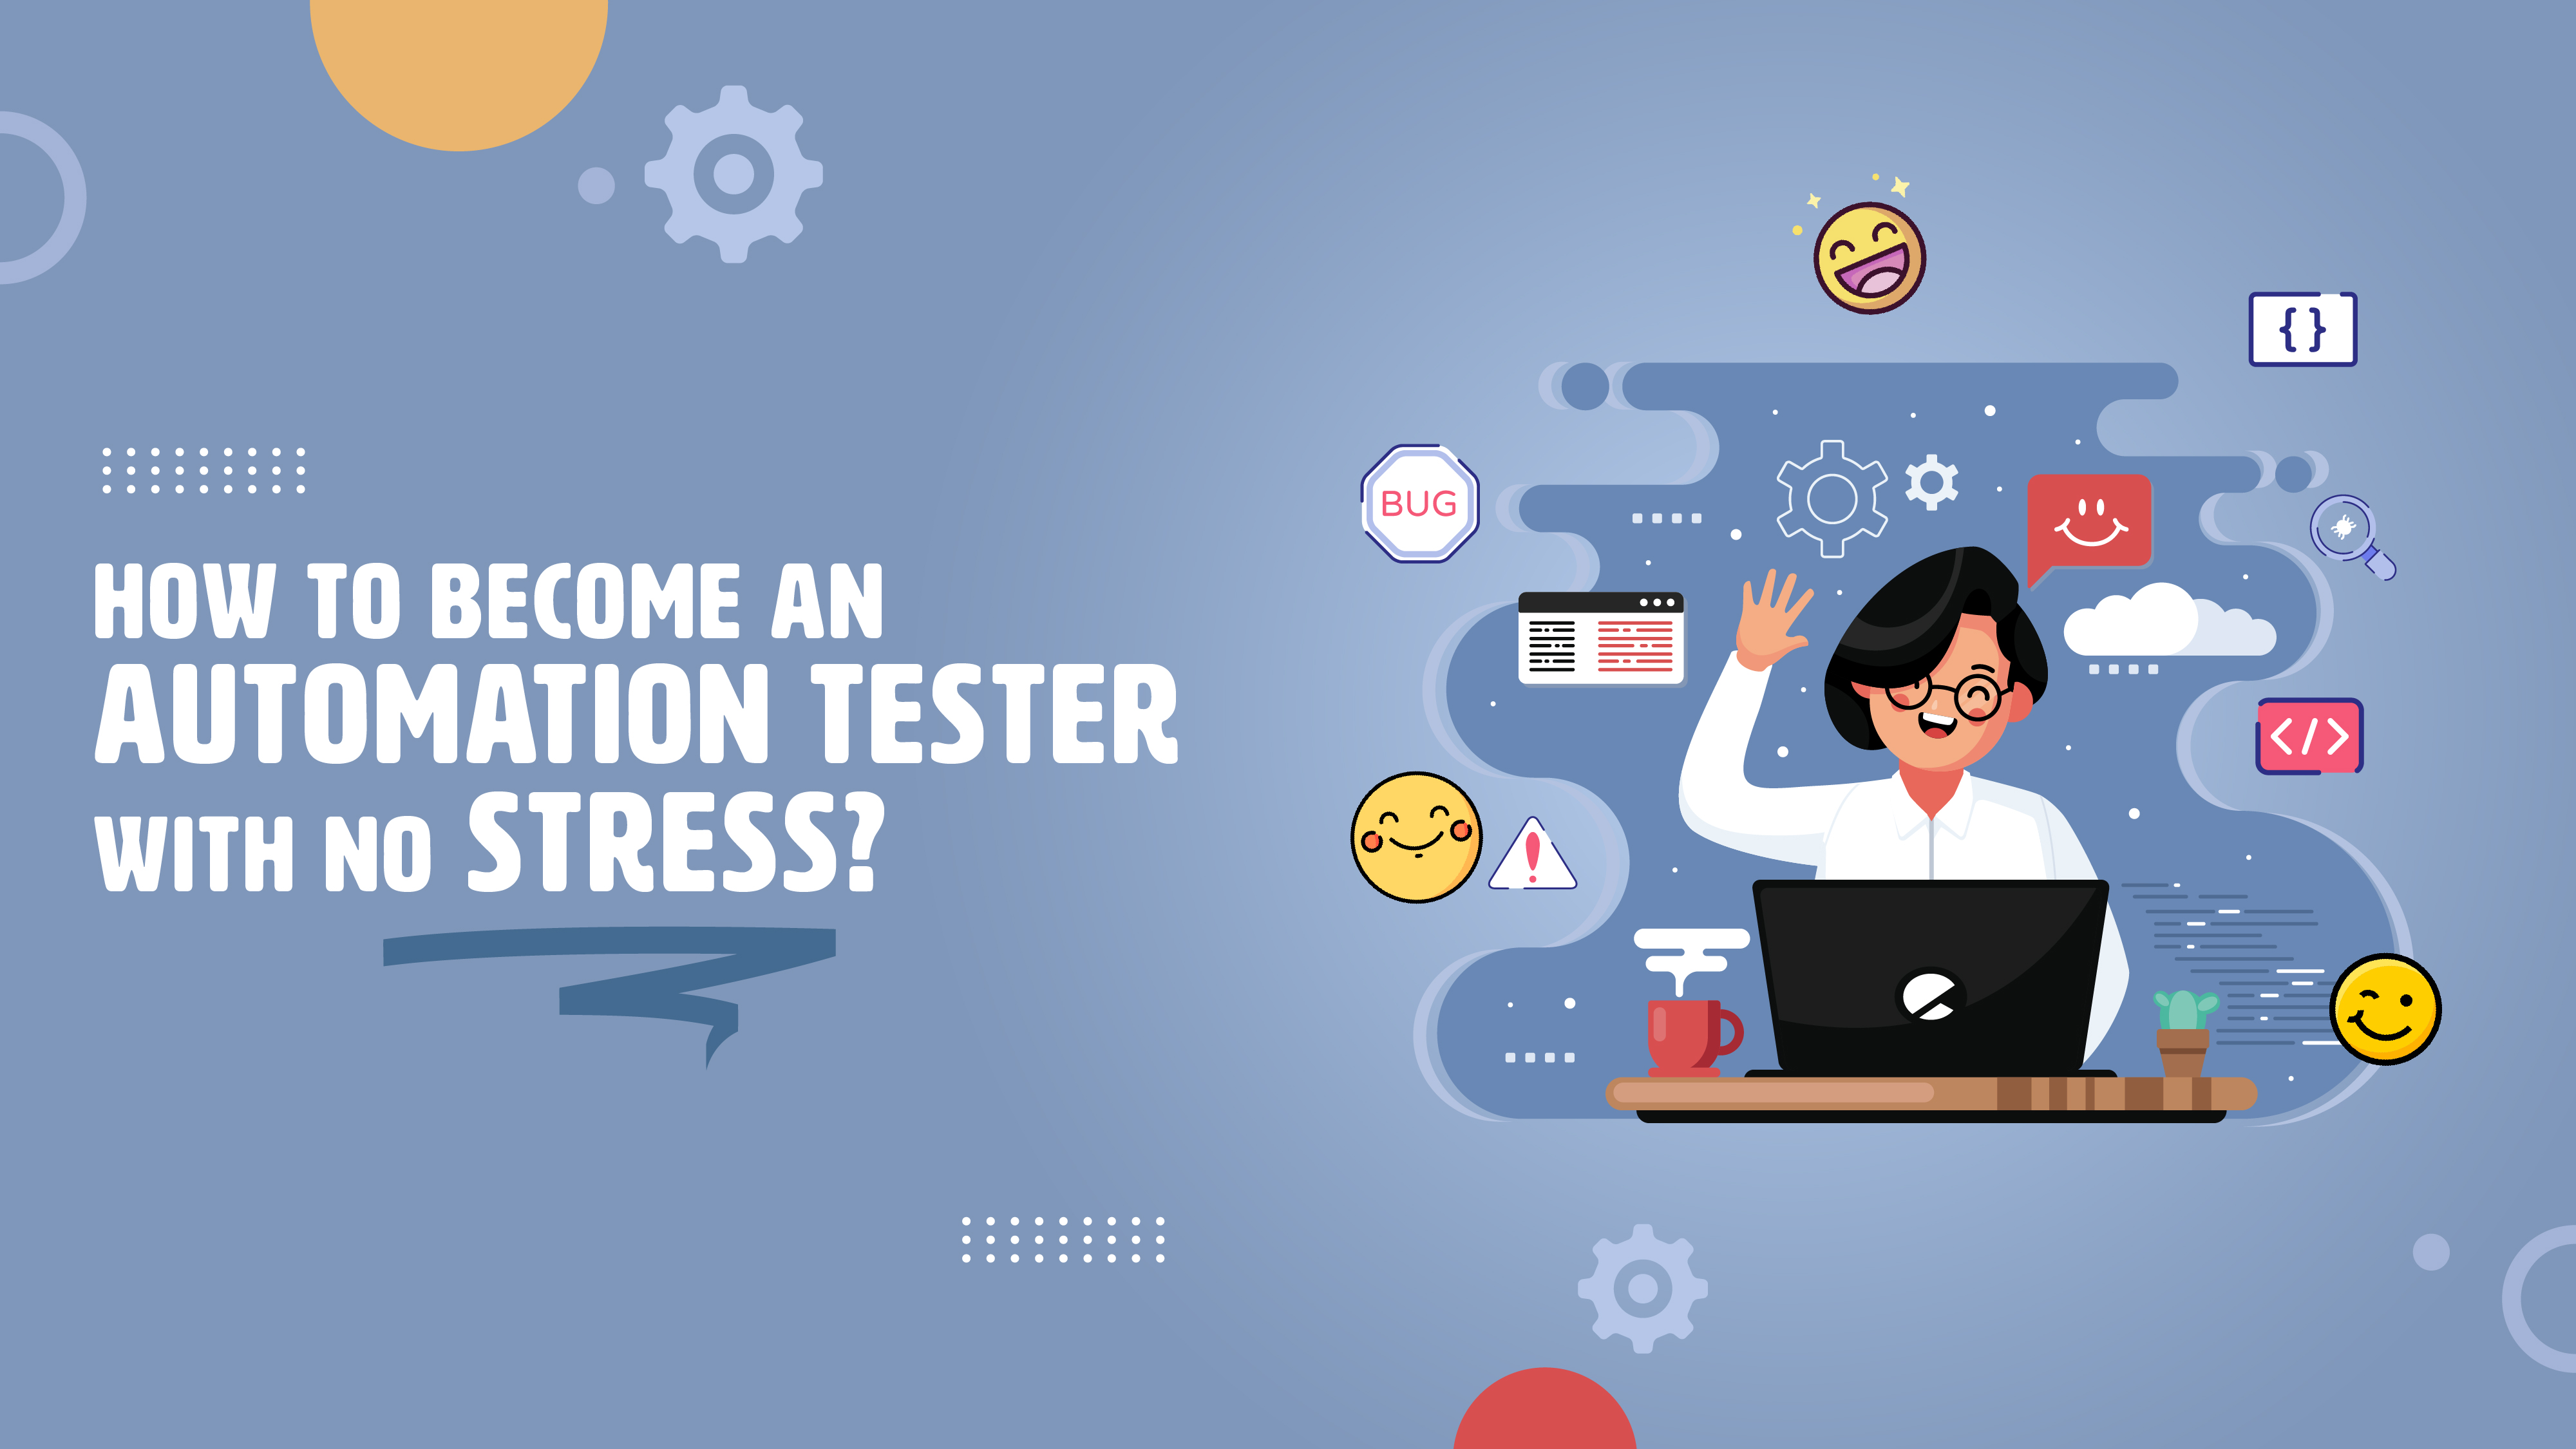 How to become an automation tester with no stress?